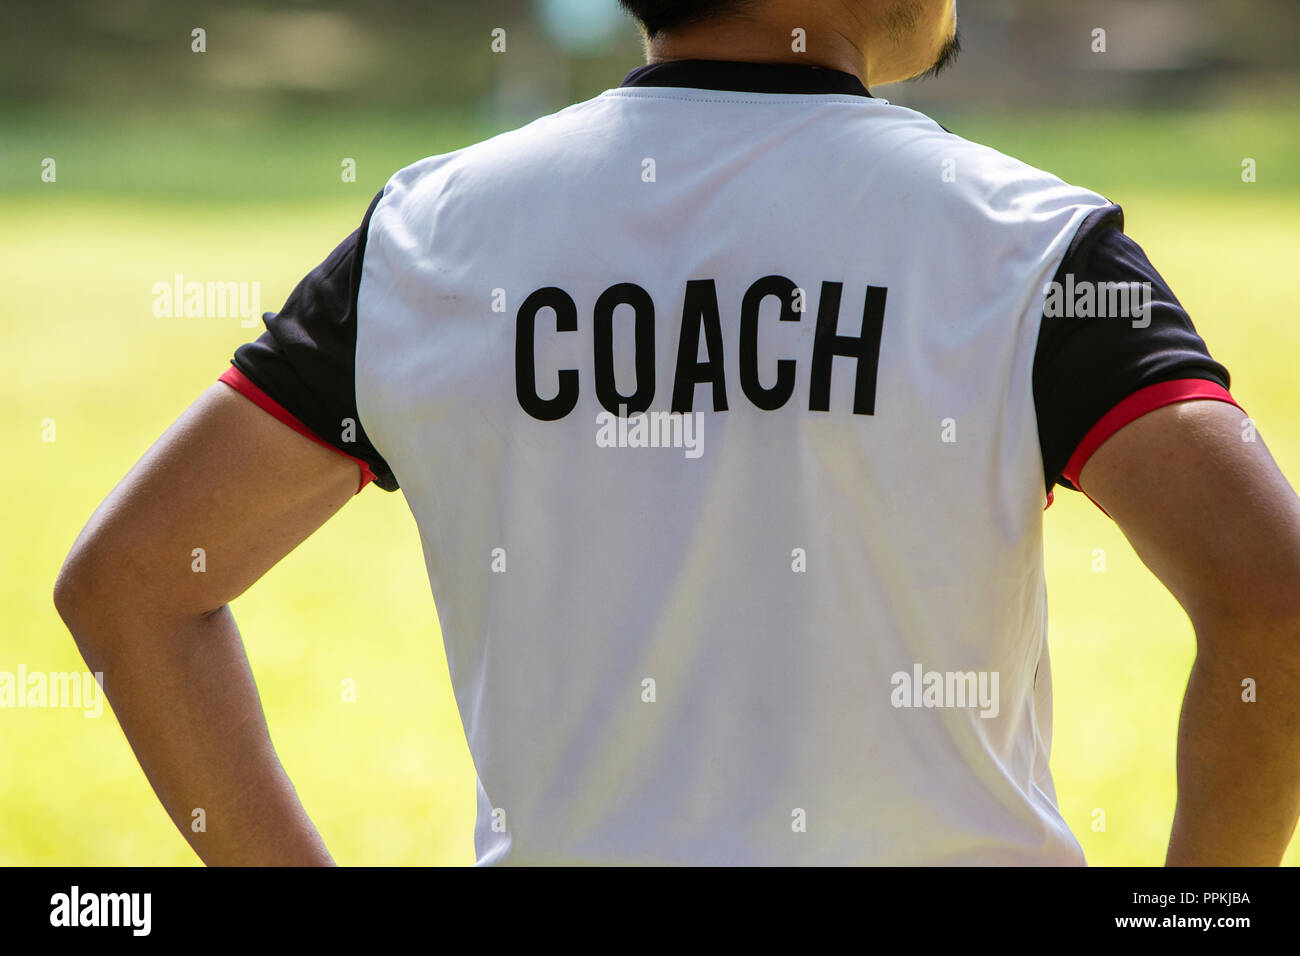 Back view of male soccer or football coach in white shirt with word COACH written on back, standing on the sideline watching his team play, good for s Stock Photo